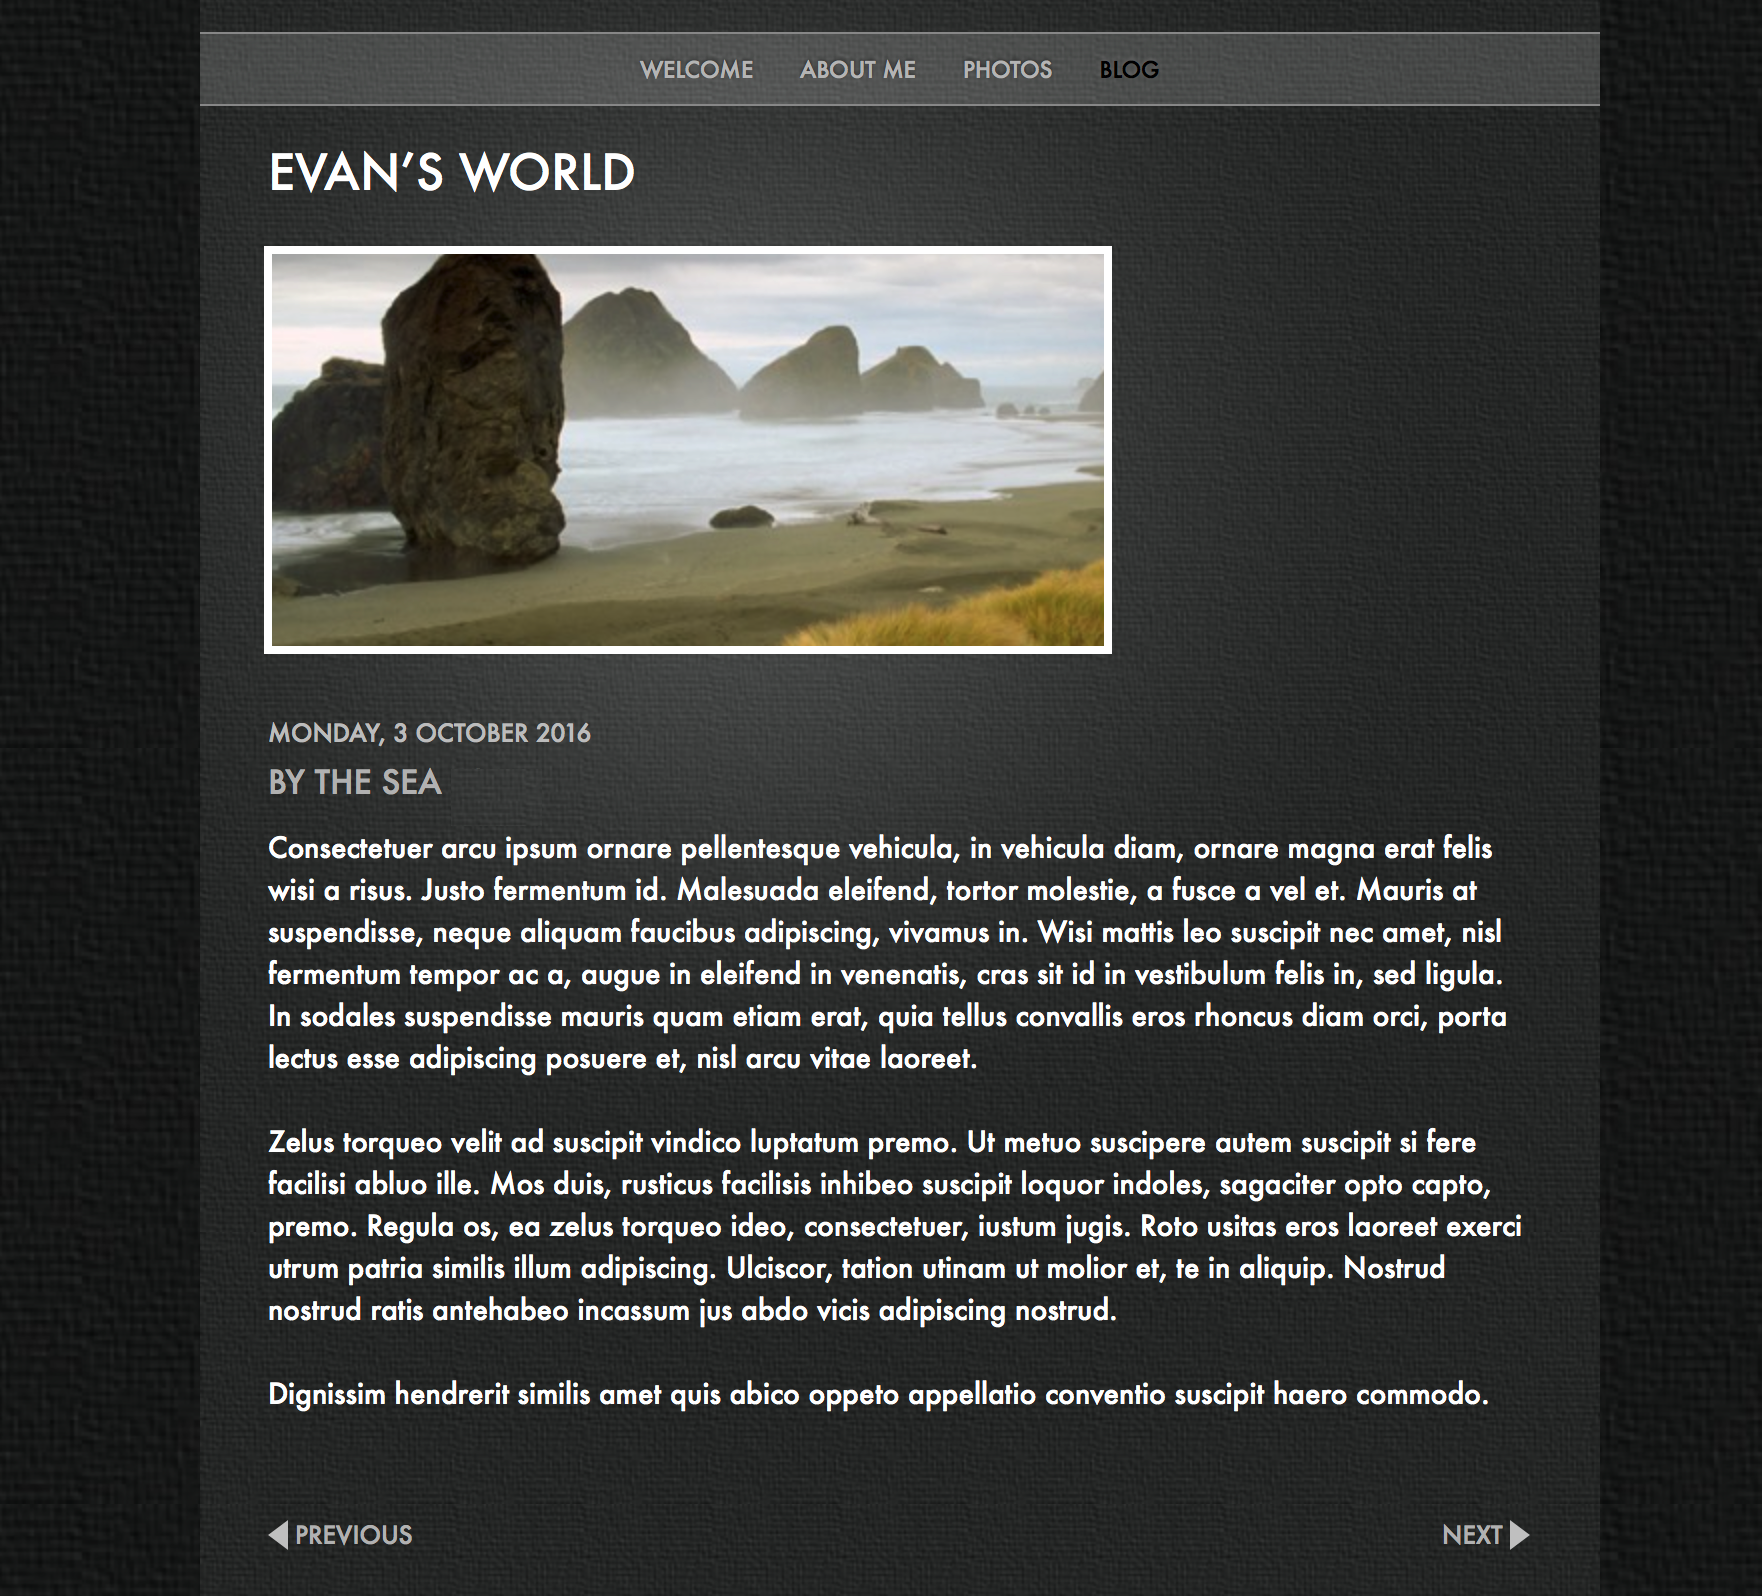 The original blog entry from iWeb can be easily recreated in the new version of EverWeb